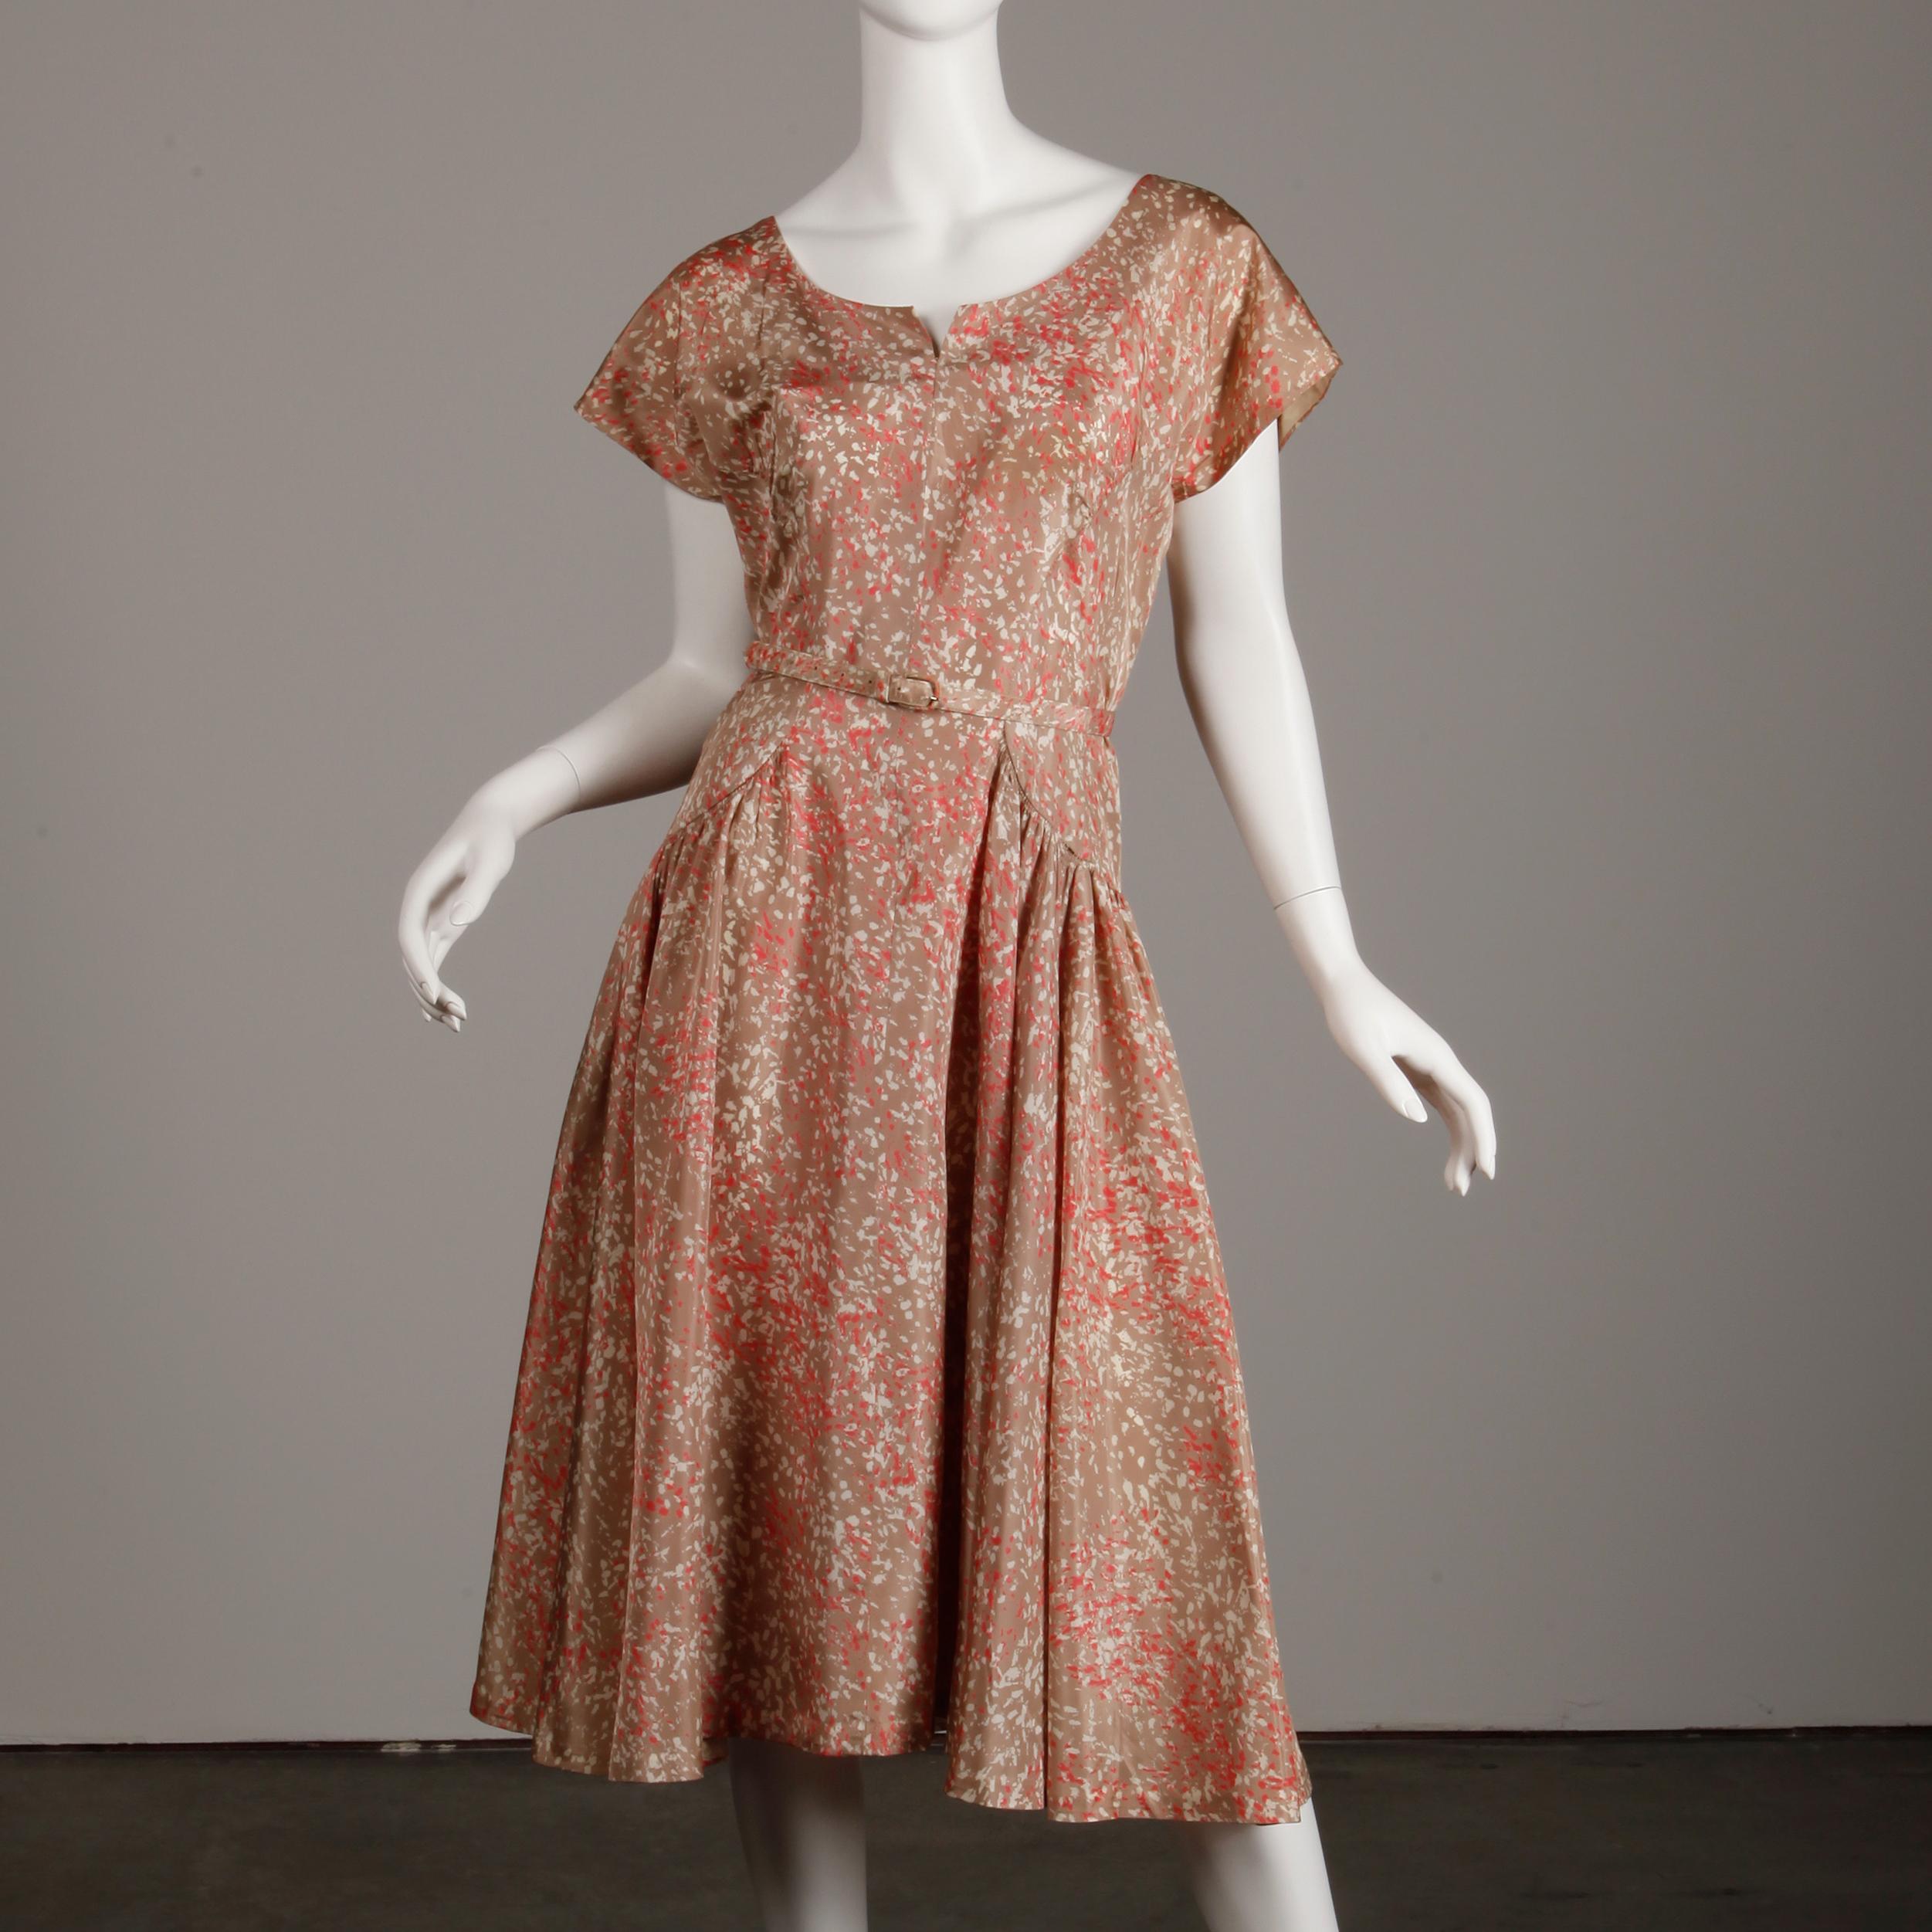 Rare 1950s size large! This vintage ensemble comes with a dress, coat and matching belt in a fantastic mid century print done in pink, beige and mauve. The dress is unlined with rear metal zip and hook closure. The dress bust measures 38